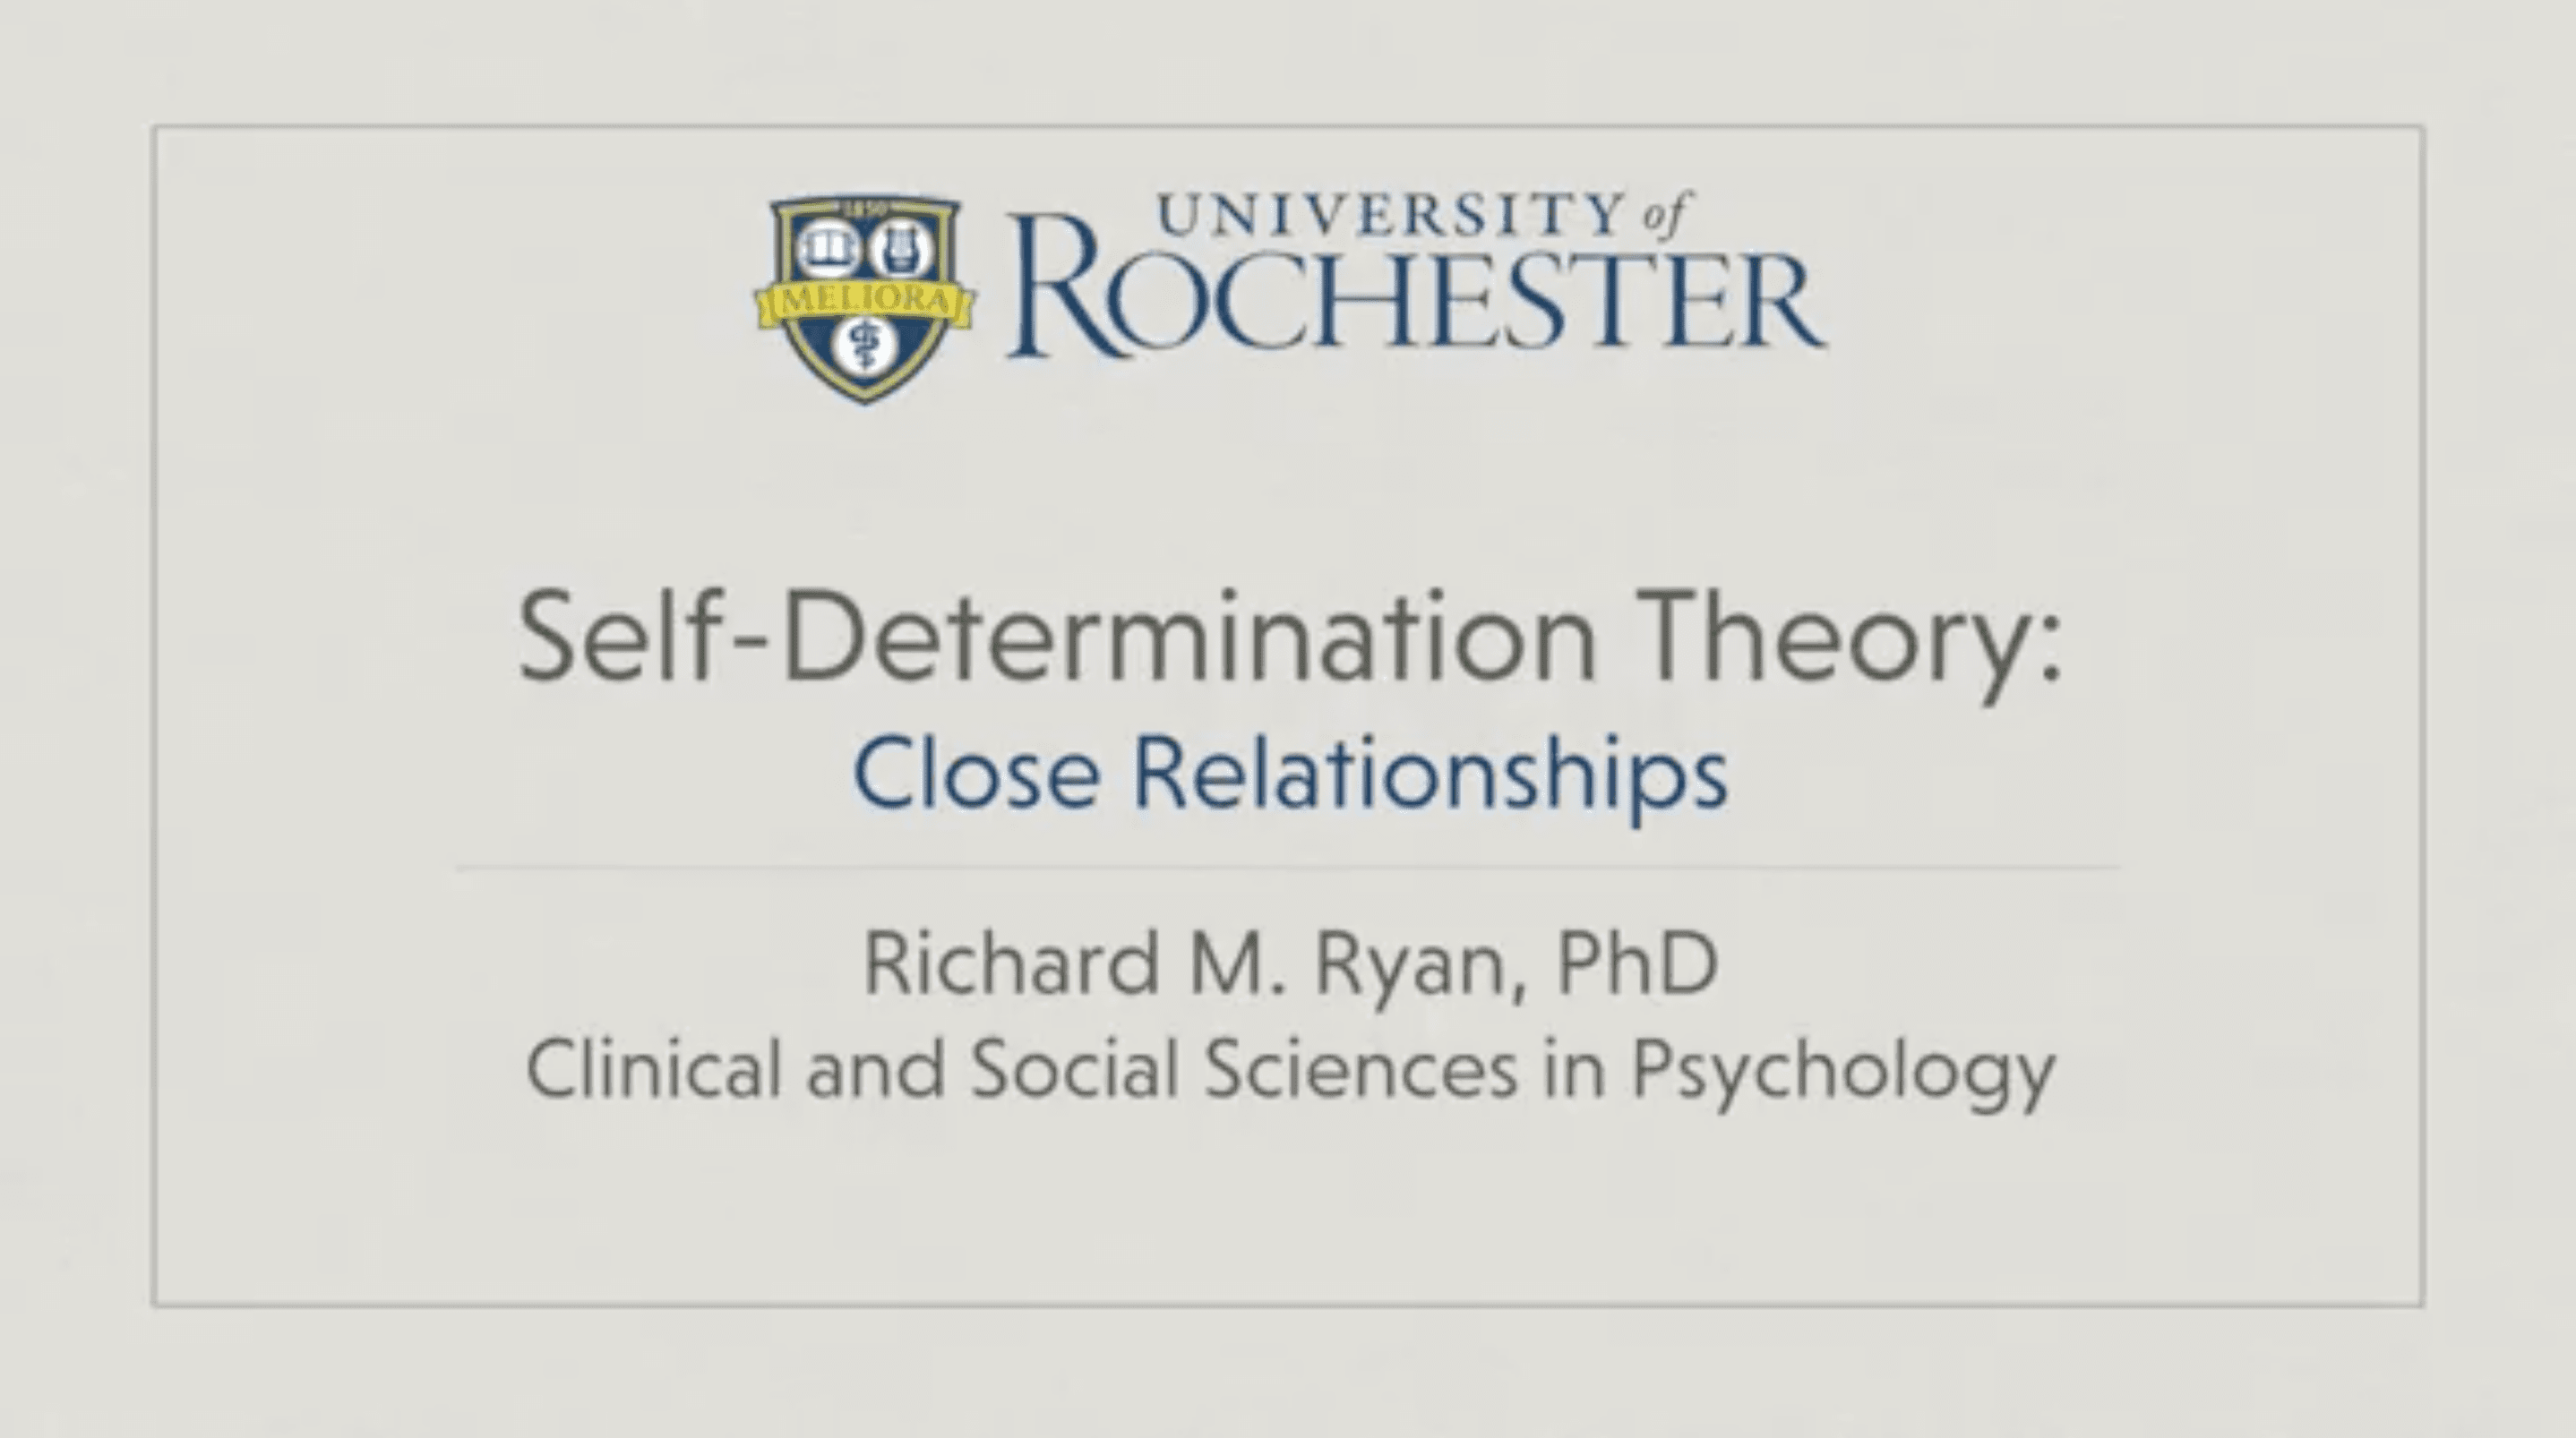 Close Relationships Coursera video with Richard M Ryan